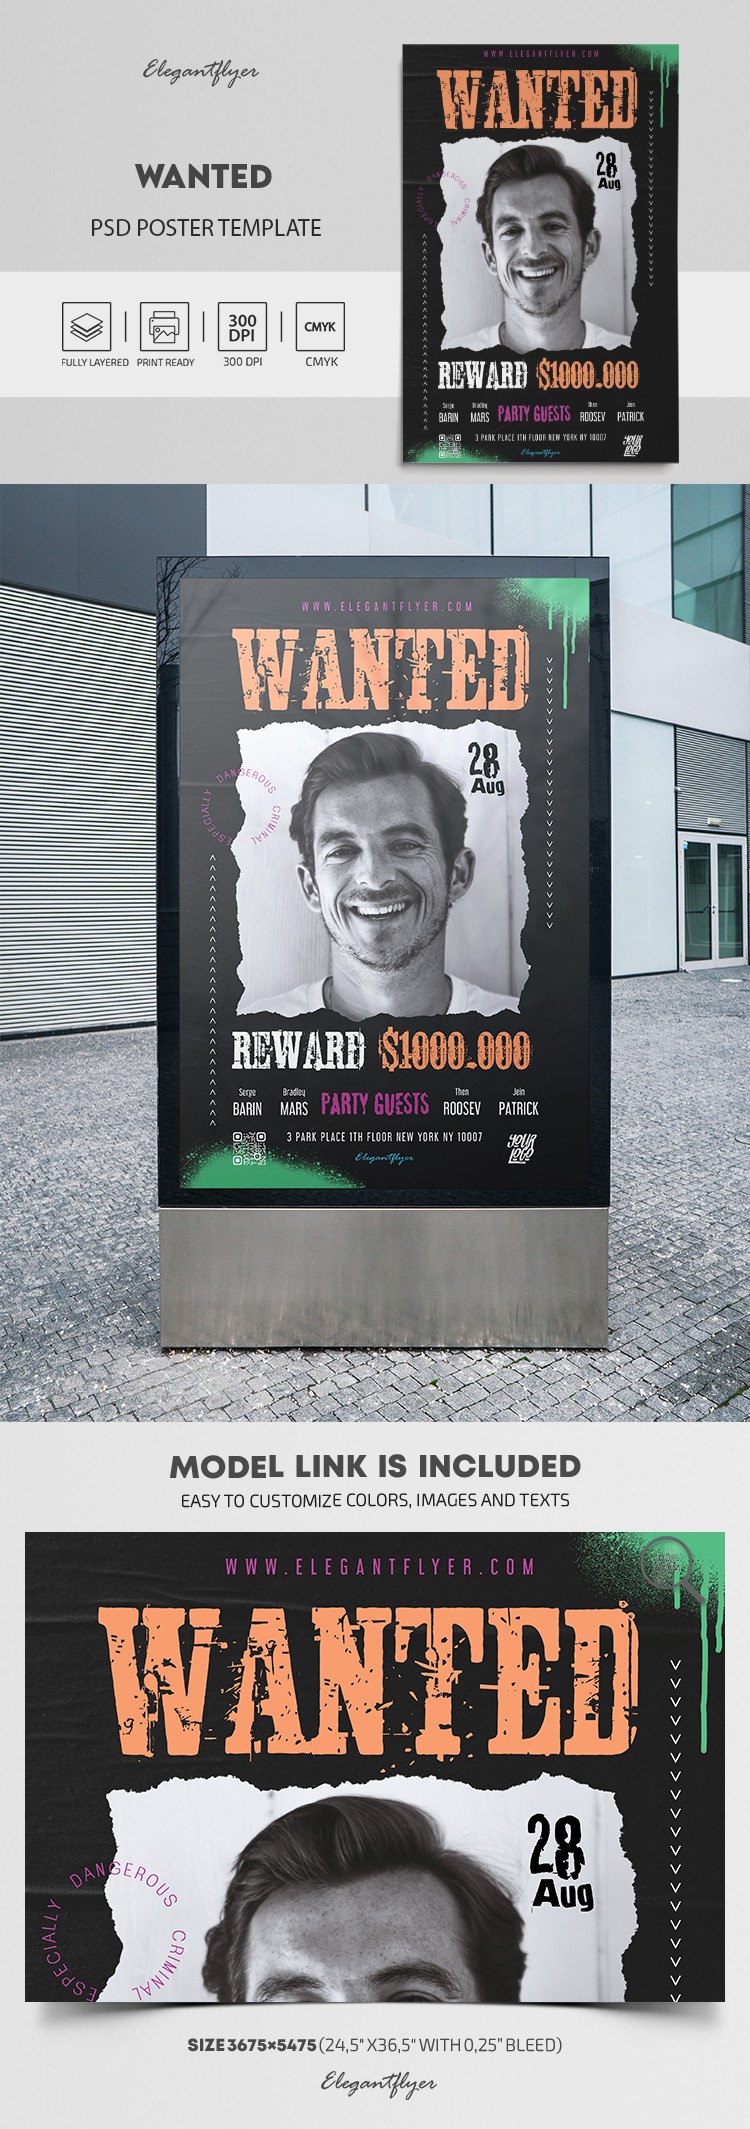 Wanted - Free PSD Poster Template by ElegantFlyer